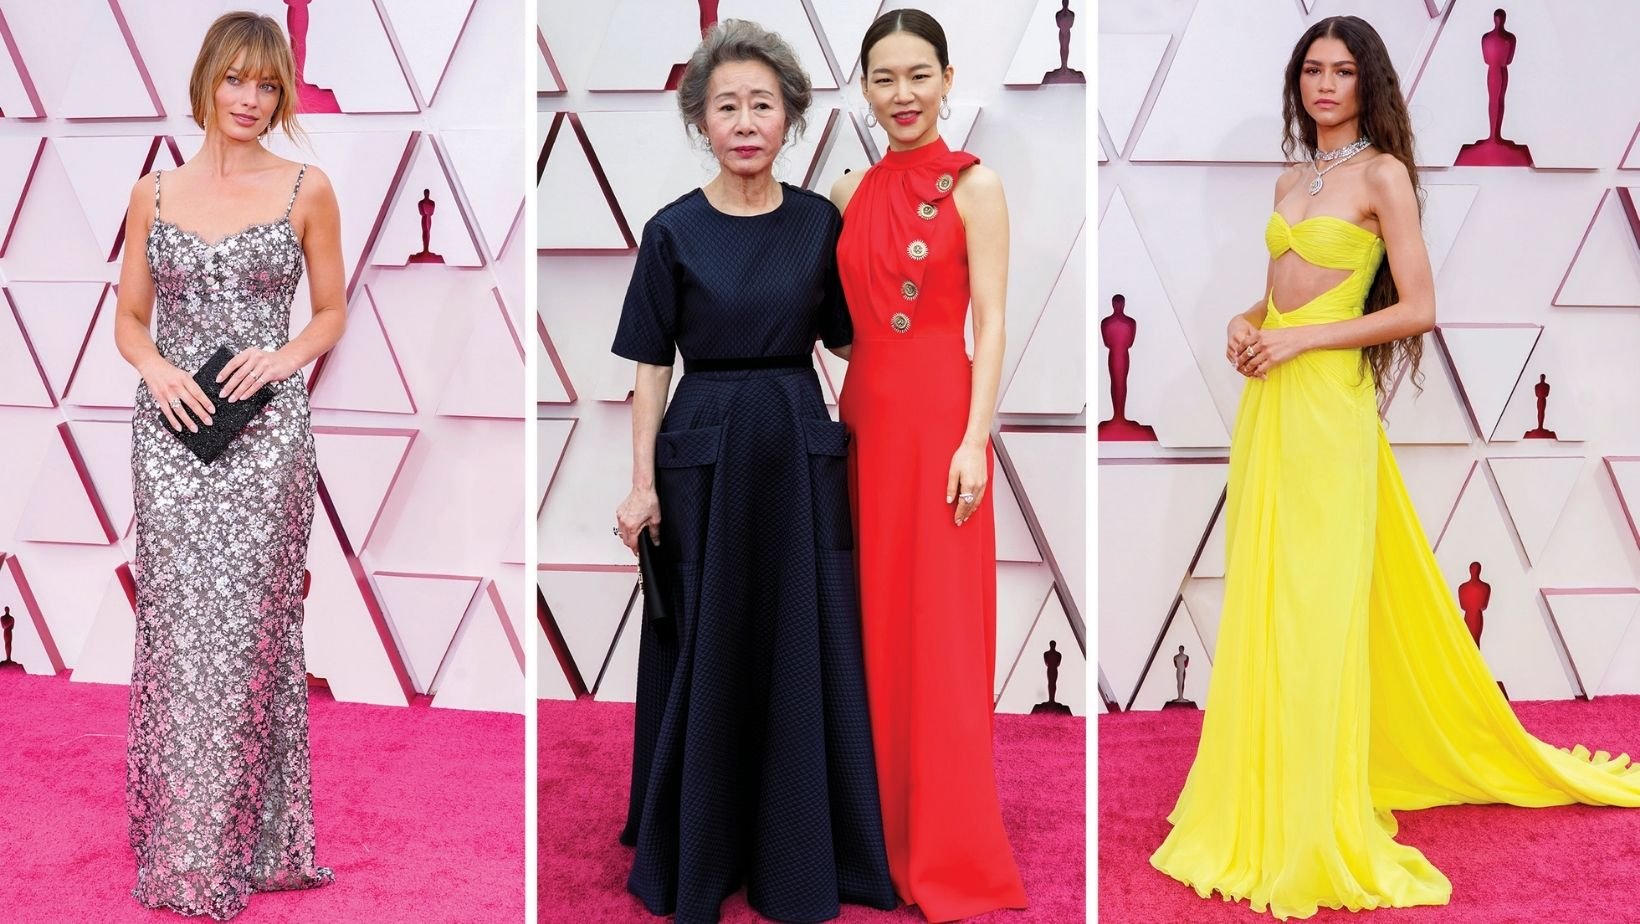 small joys thumbnail 7.jpg?resize=1200,630 - The Top Best-Dressed Celebrities In The Socially-Distanced 2021 Academy Awards